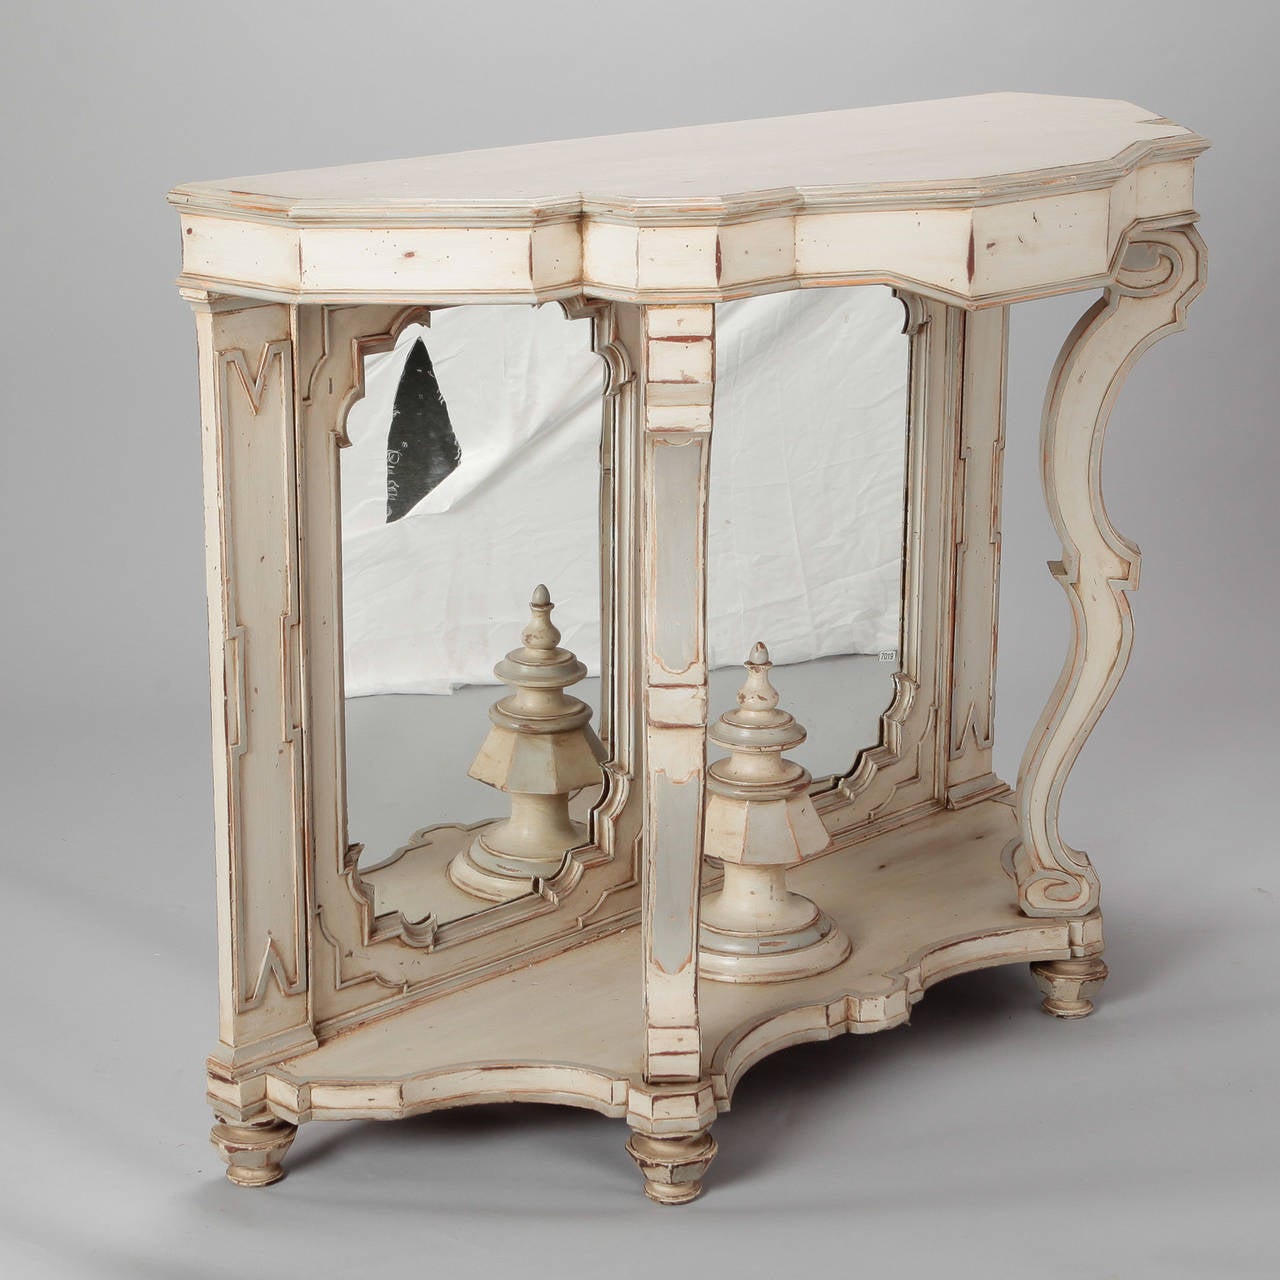 Circa 1900 Italian wood console with creamy antique white painted finish. Curved legs rest on a footed base with a double mirrored back and large, turned center finial.